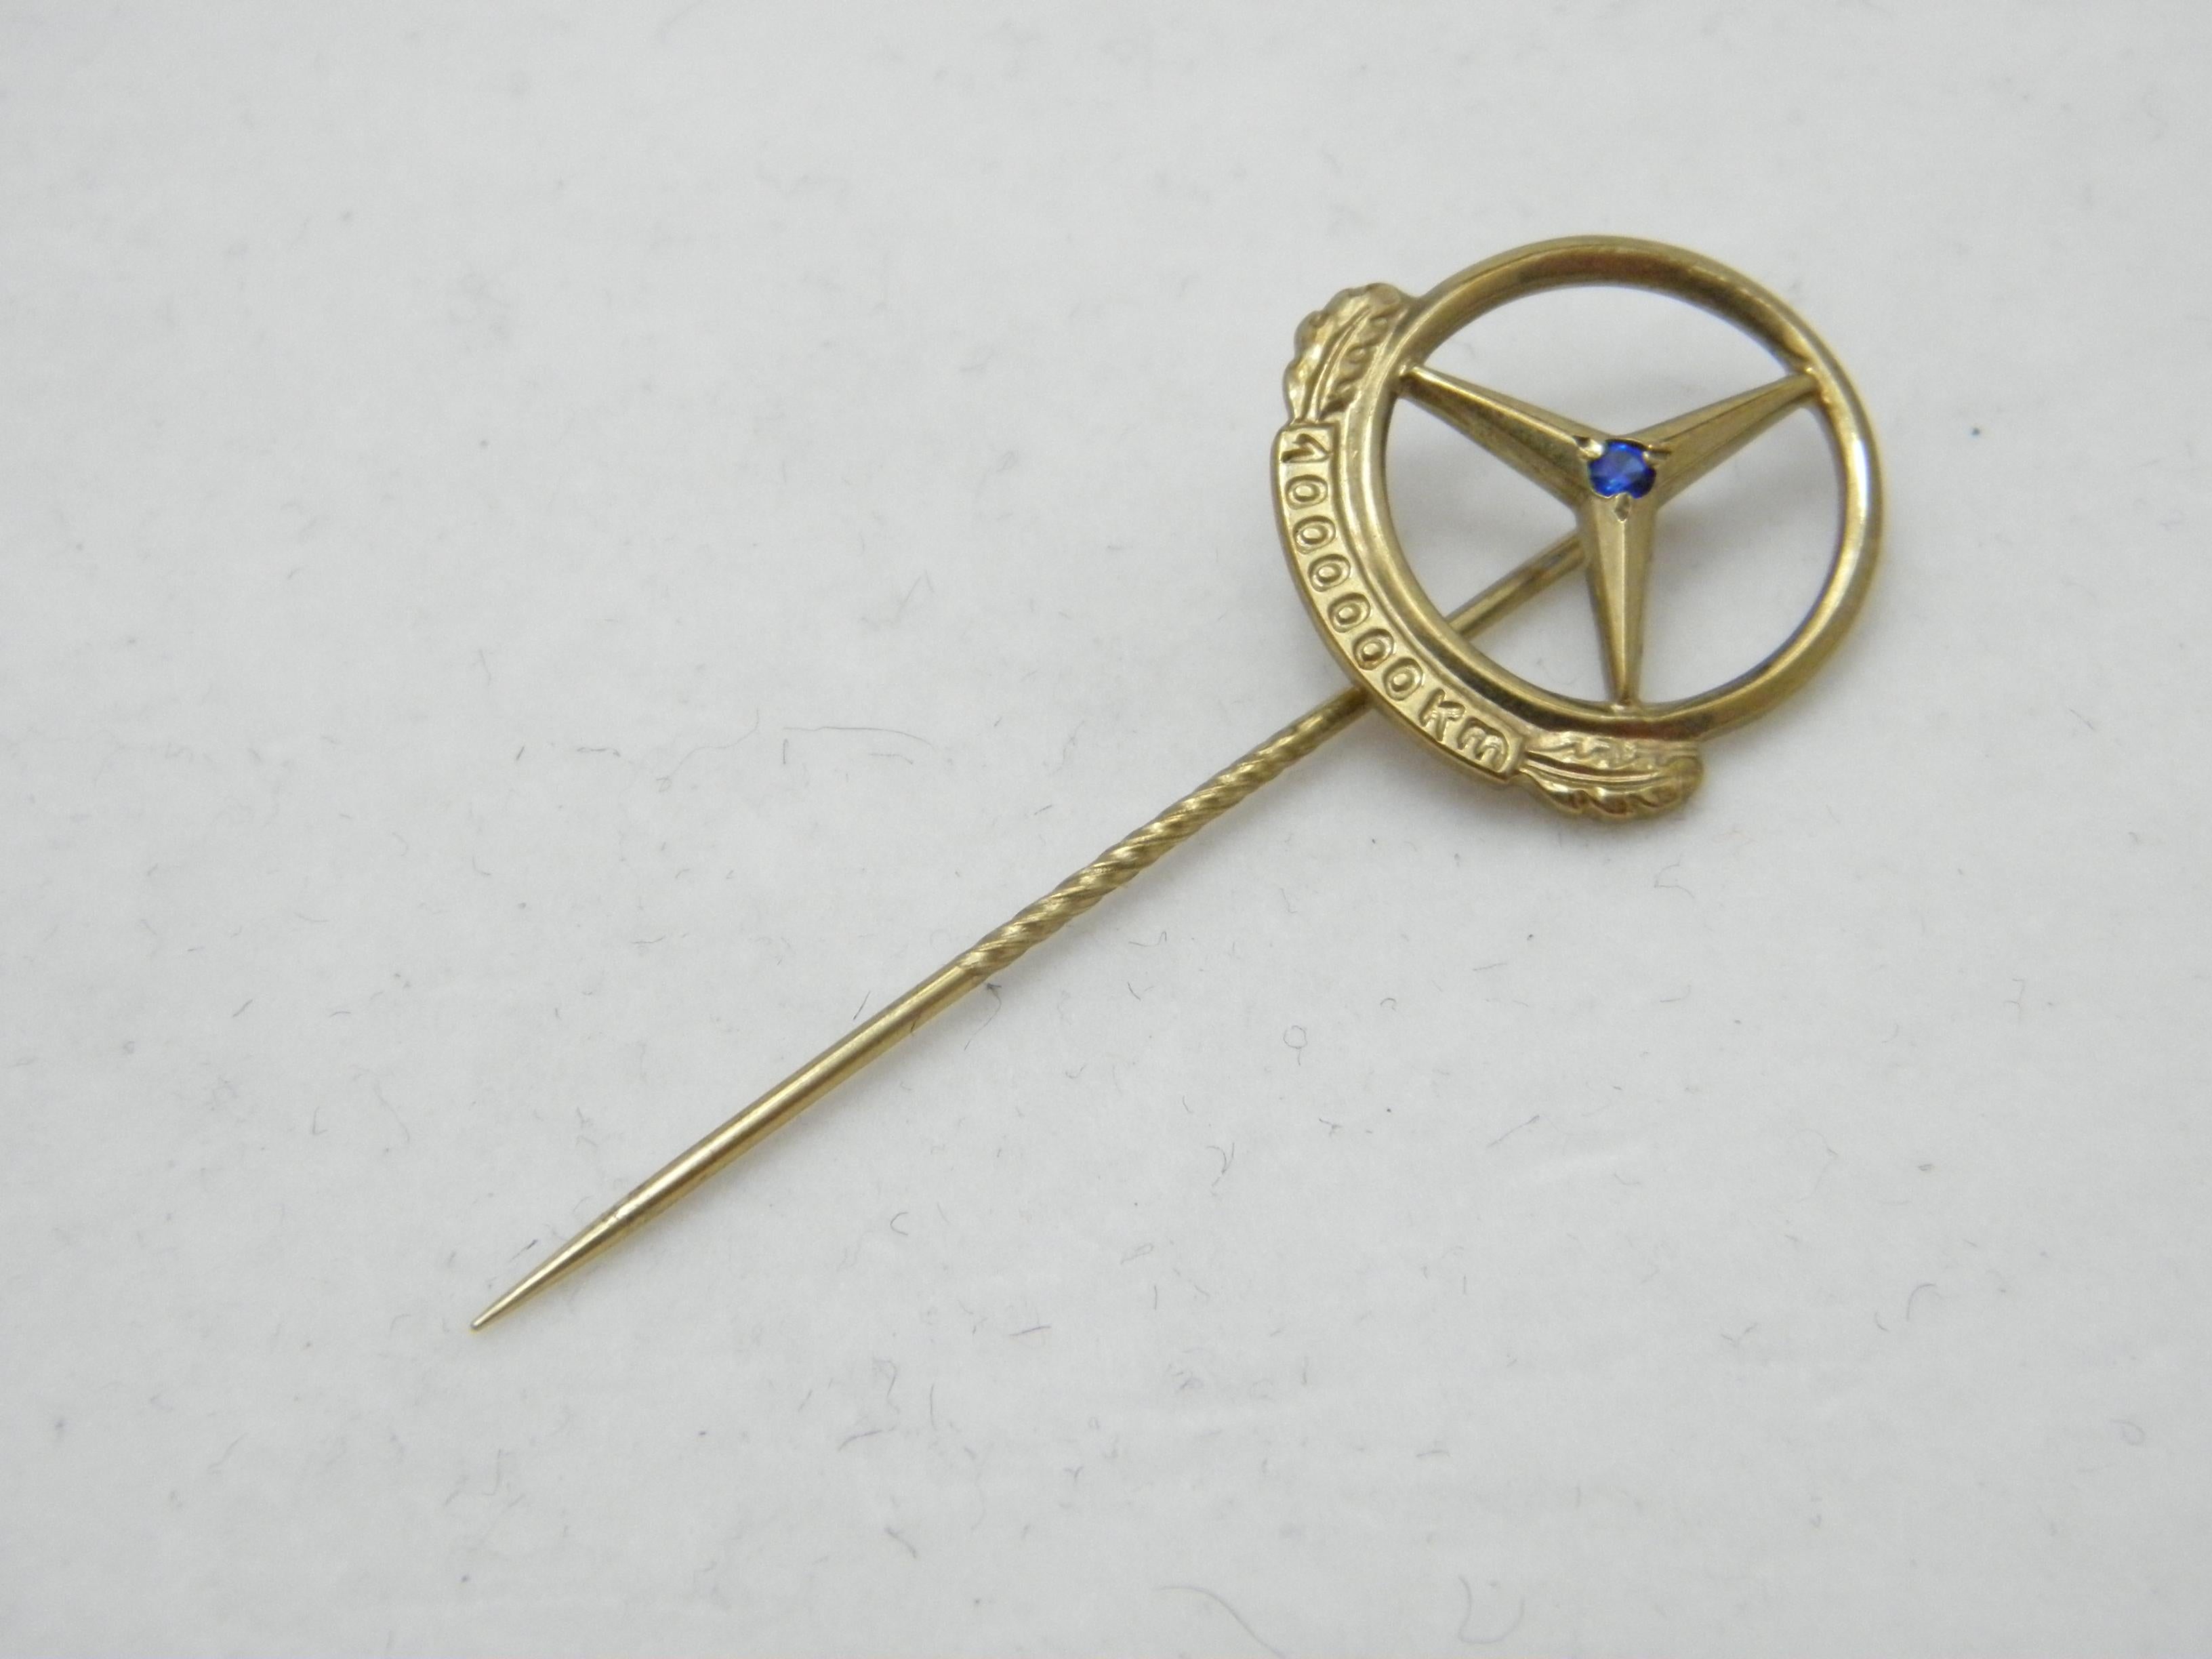 If you have landed on this page then you have an eye for beauty.

On offer is this gorgeous

8CT HEAVY GOLD MERCEDES BENZ 1,000,000KM STOCK PIN BROOCH

DETAILS
Material: 8ct (333/000) Solid Heavy Rosey Yellow Gold
Style: Classic Gem set Mercedes pin